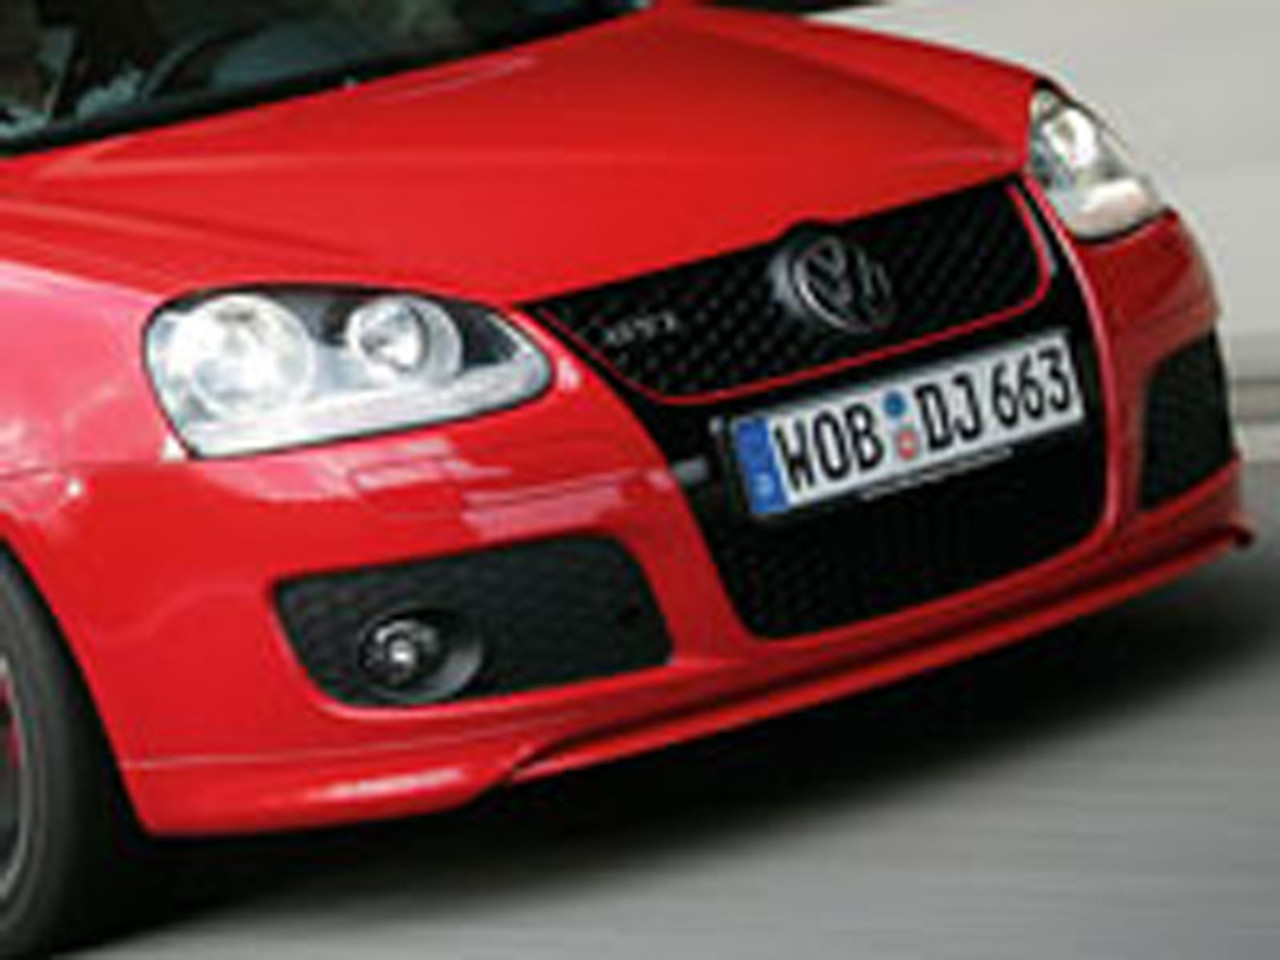 Original VW Mk5 GTI Anniversary Edition 30 Front Spoiler - Awesome